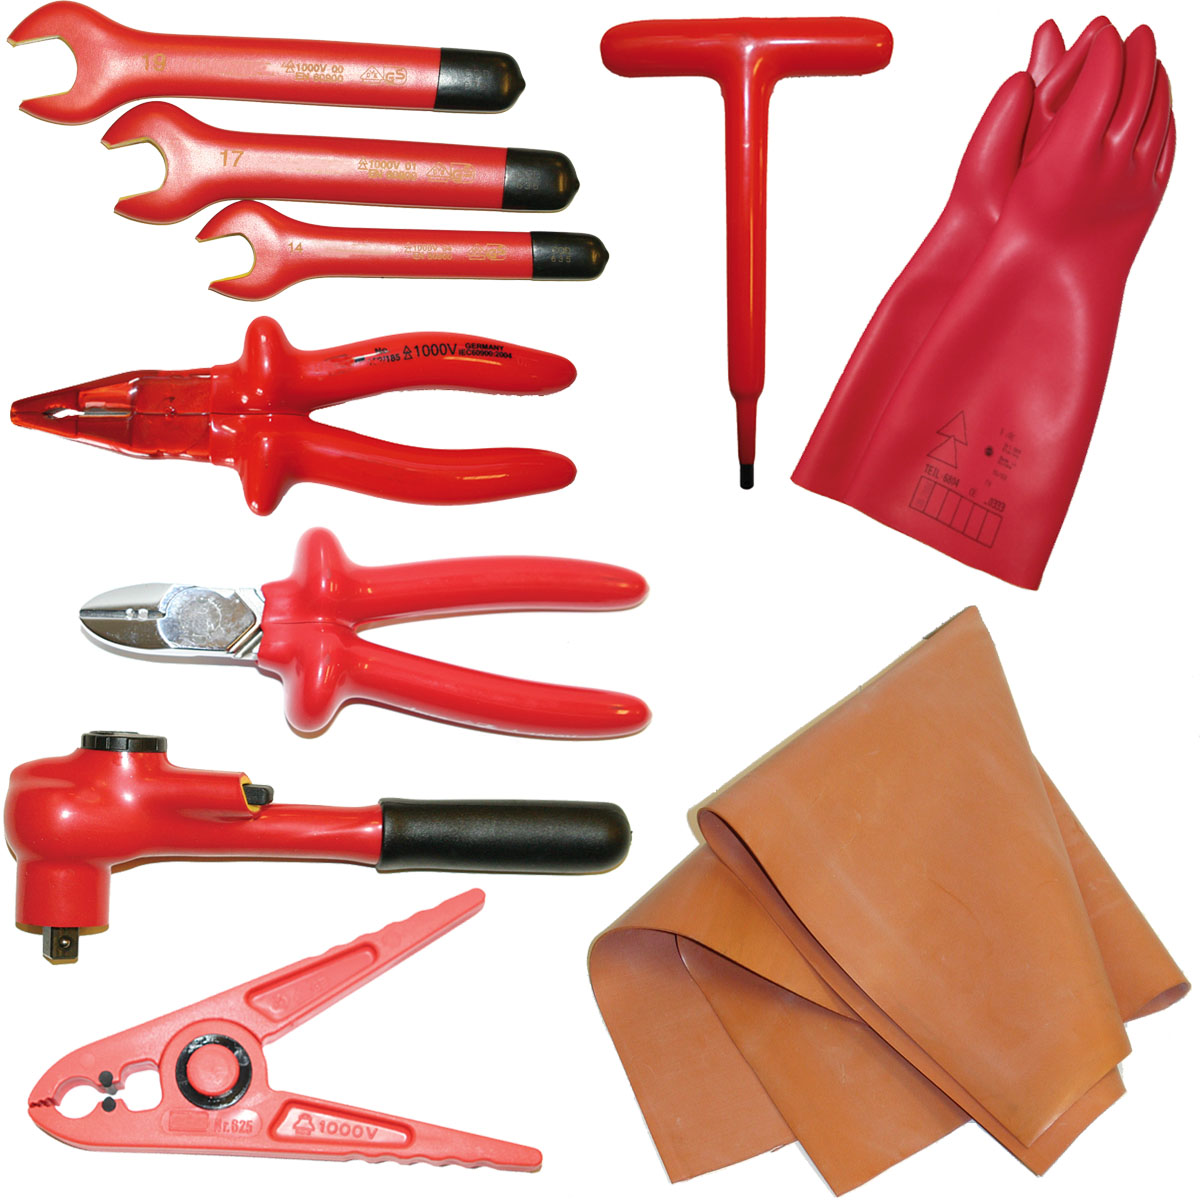 1000 V insulated tools and equipment